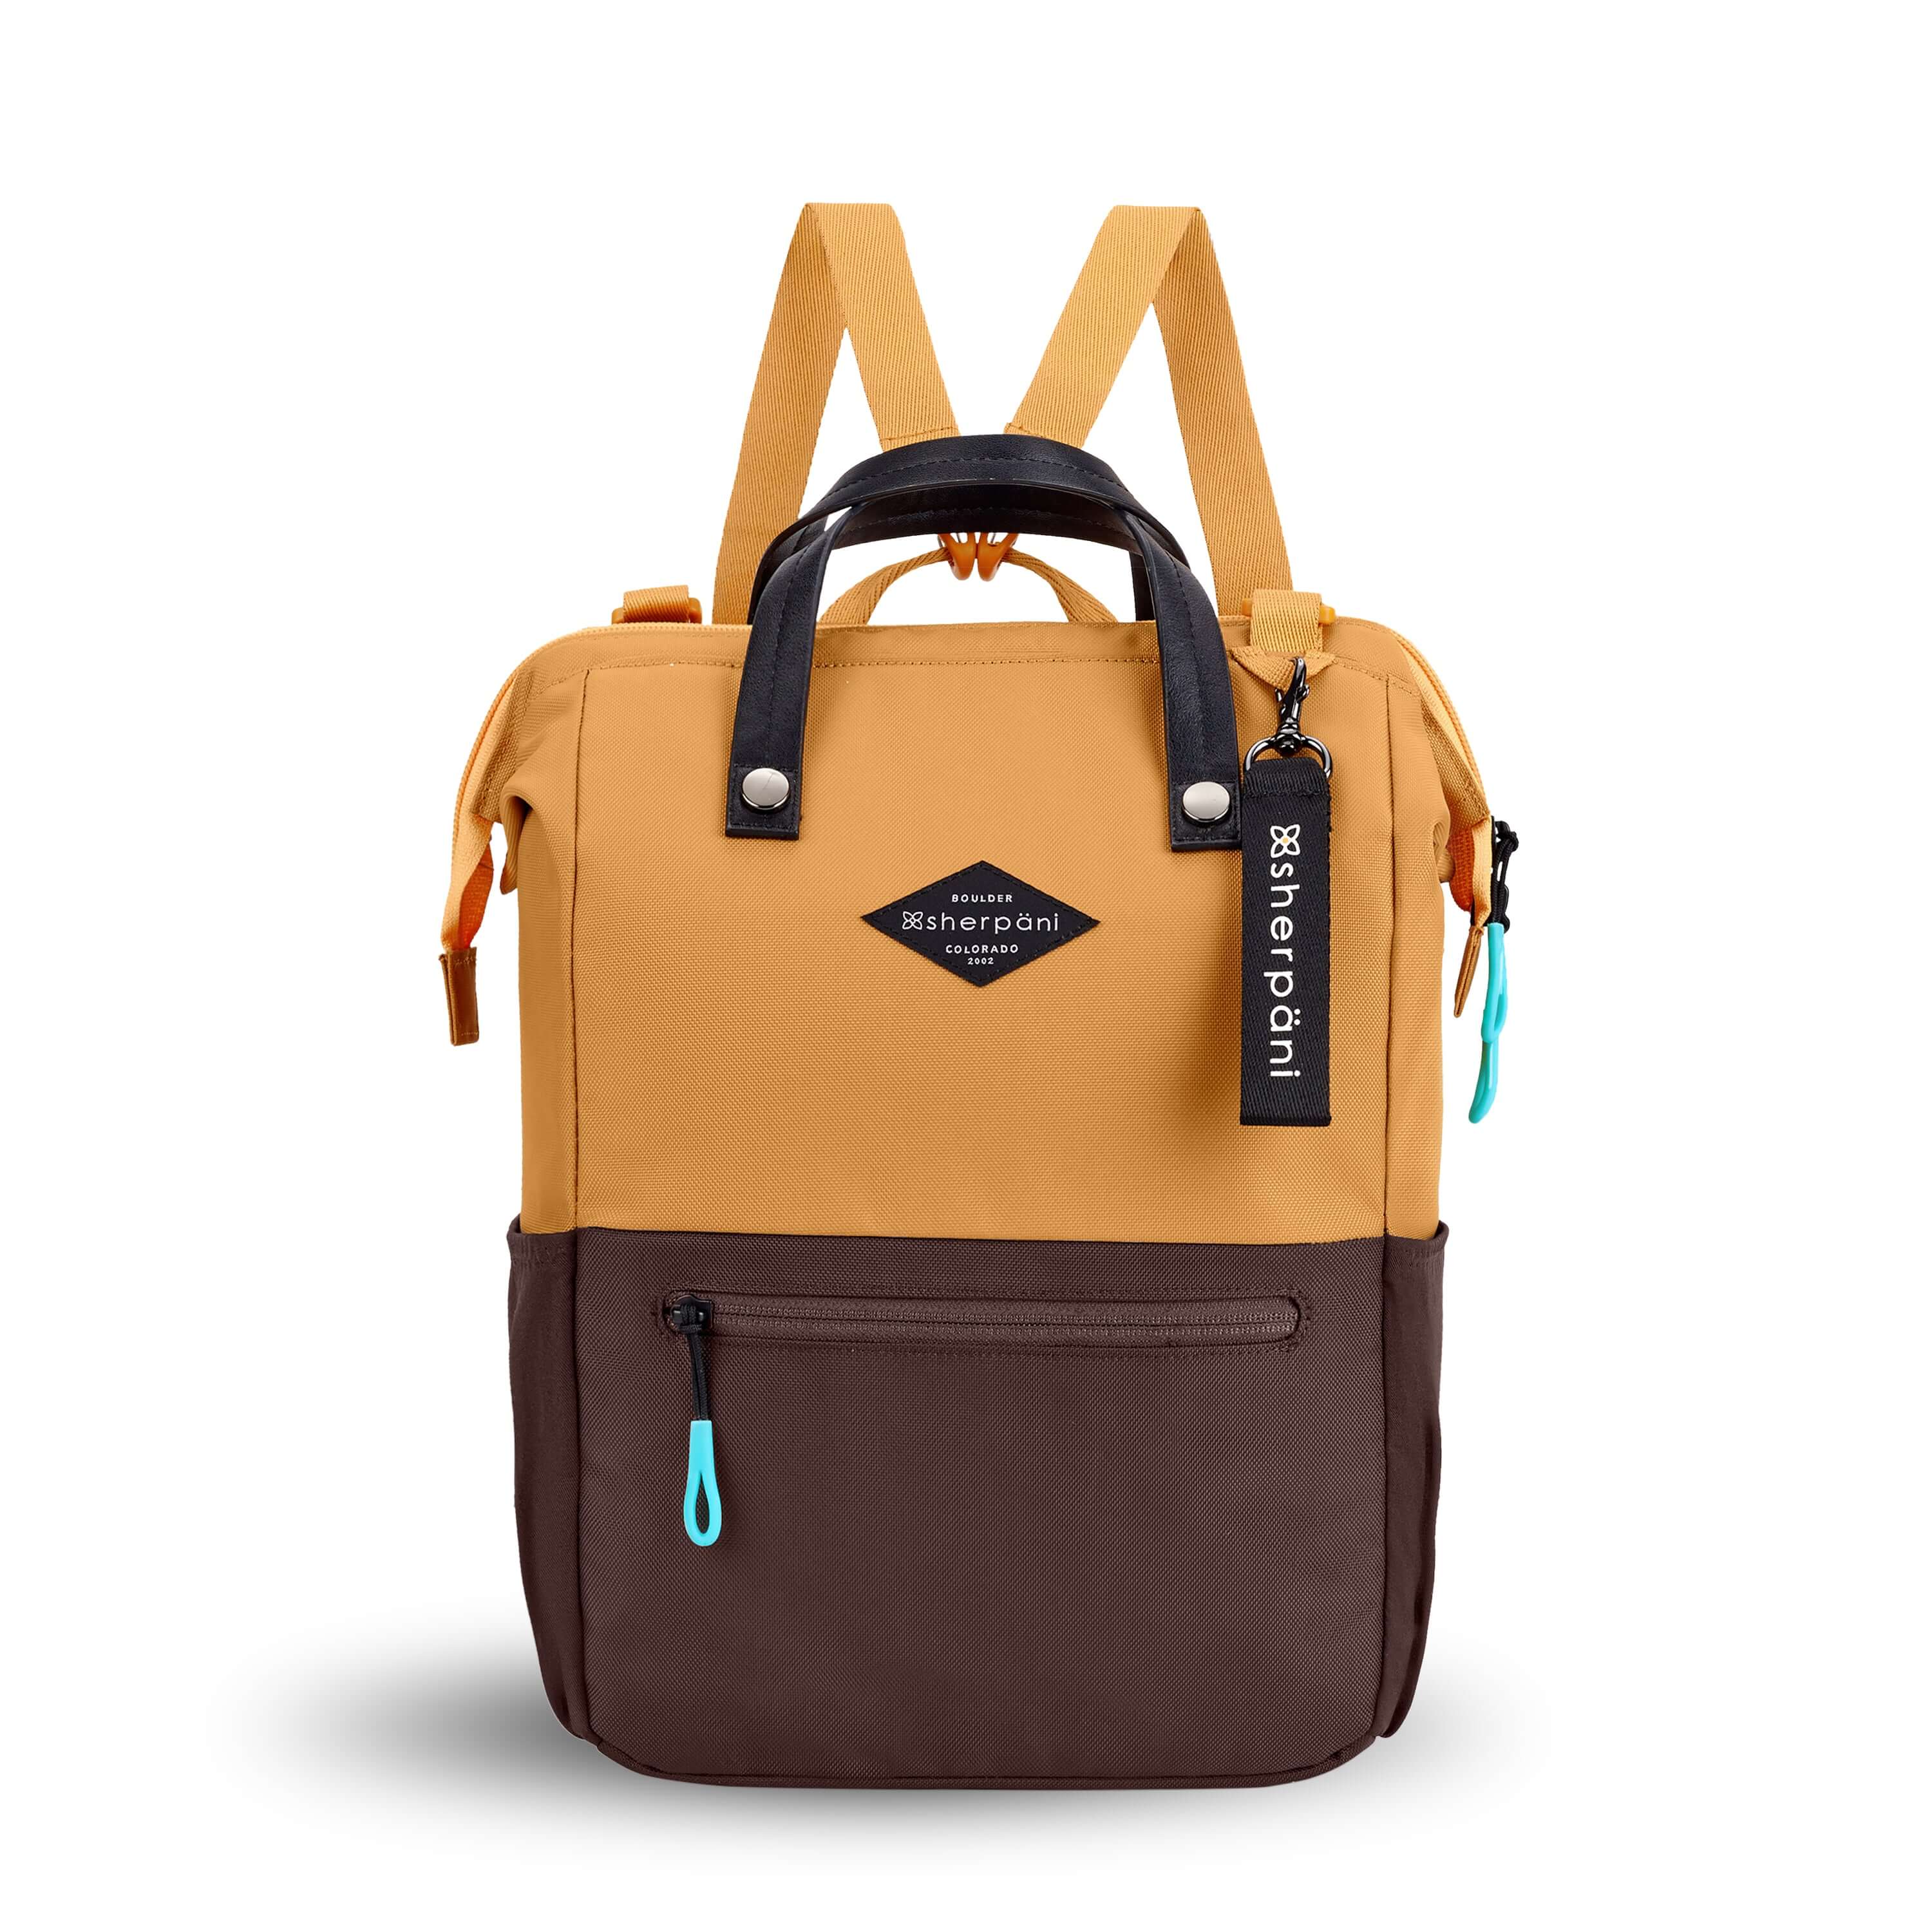 Flat front view of Sherpani three-in-one bag, the Dispatch in Sundial. The bag is two-toned: the top is burnt yellow and the bottom is brown. There is an external zipper pocket on the front panel. Easy-pull zippers are accented in aqua. A branded Sherpani keychain is clipped to the upper right corner. Elastic water bottle holders sit on either side of the bag. It has short tote handles and adjustable/detachable straps that can function for a backpack or crossbody. 